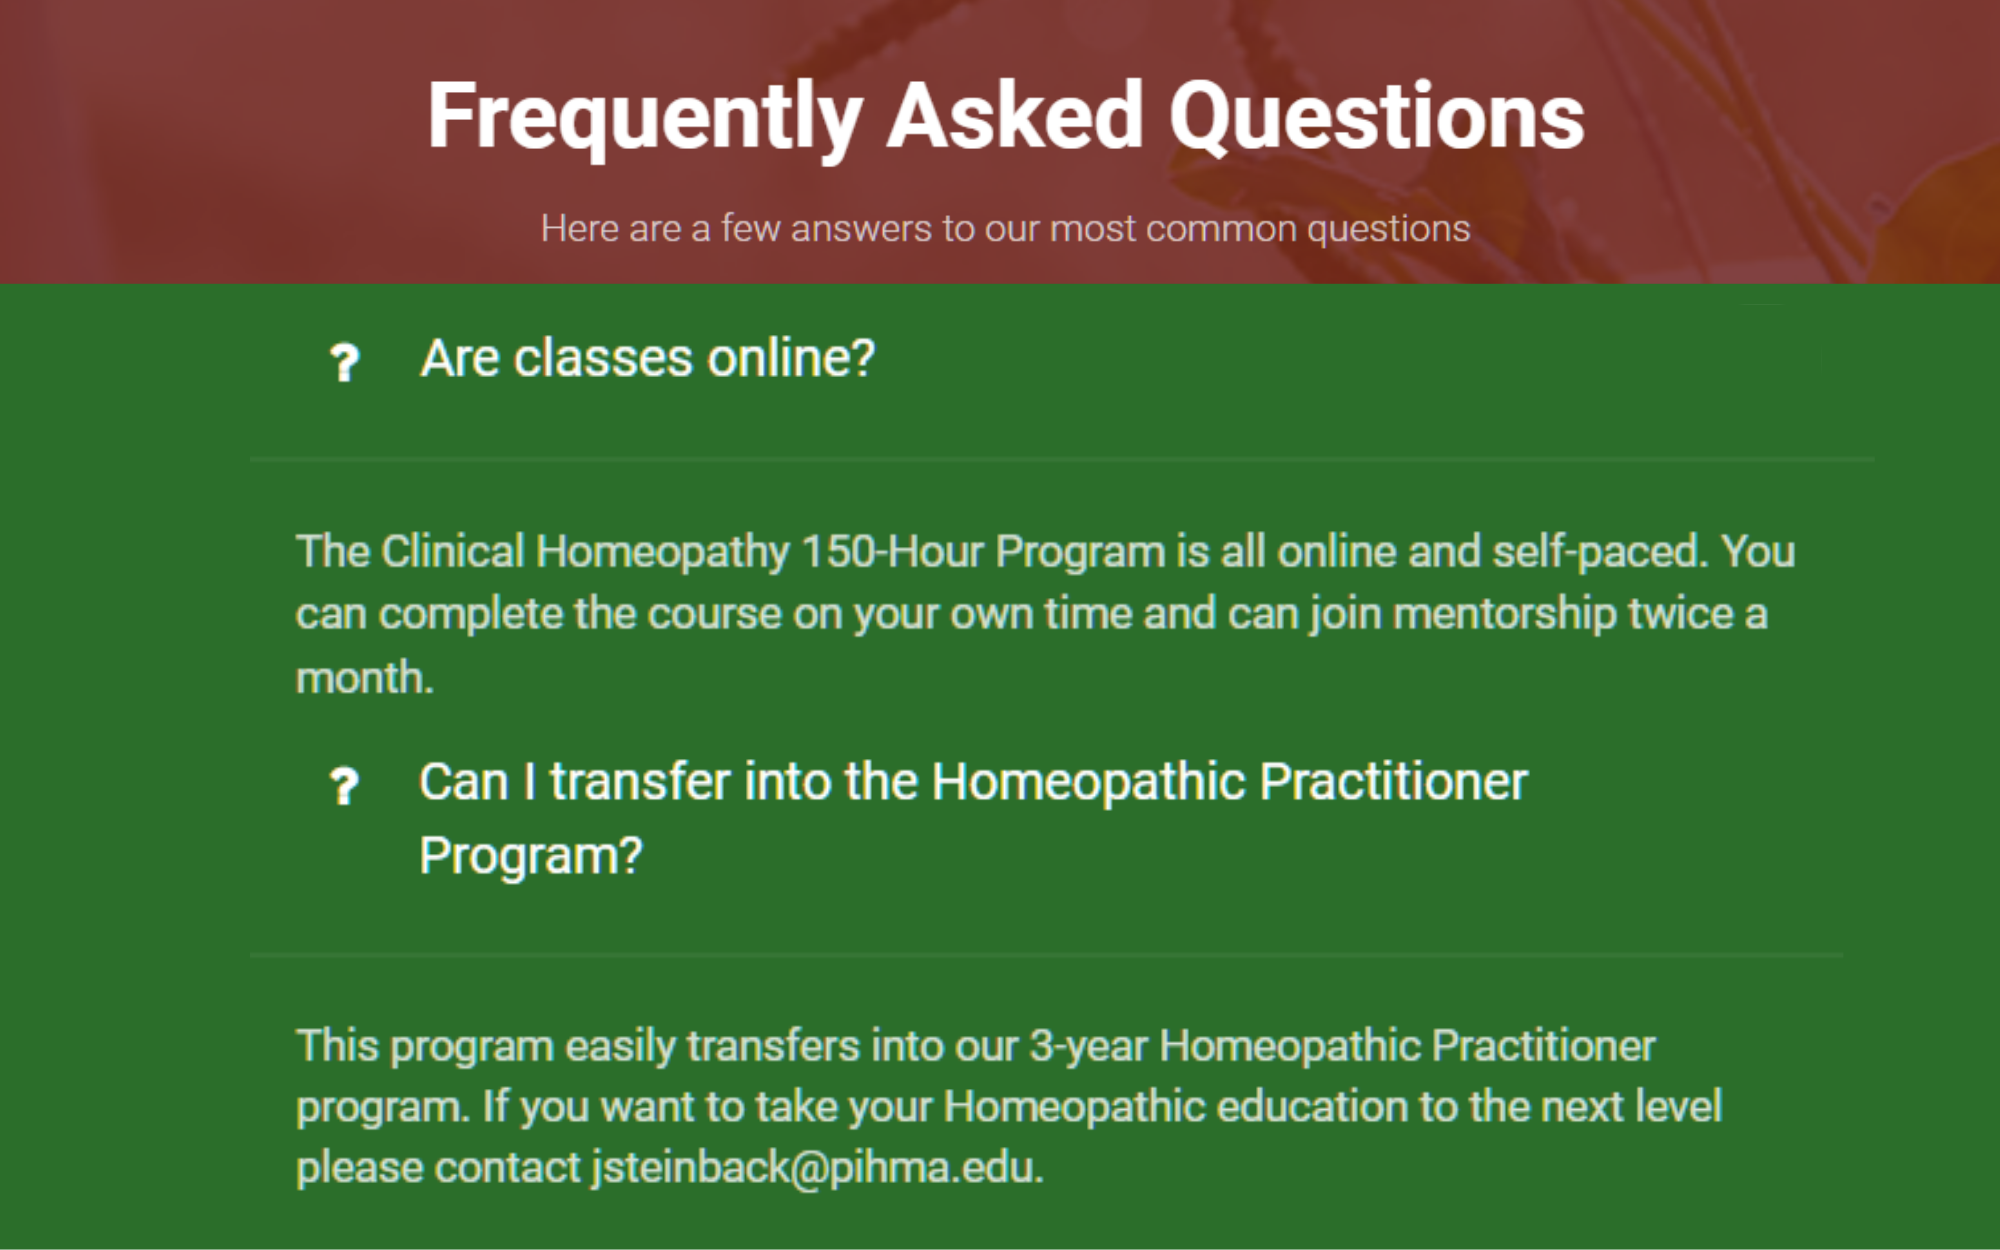 FAQs: Are classes online? Yes. Can I transfer to practitioner program? Yes, email contact.